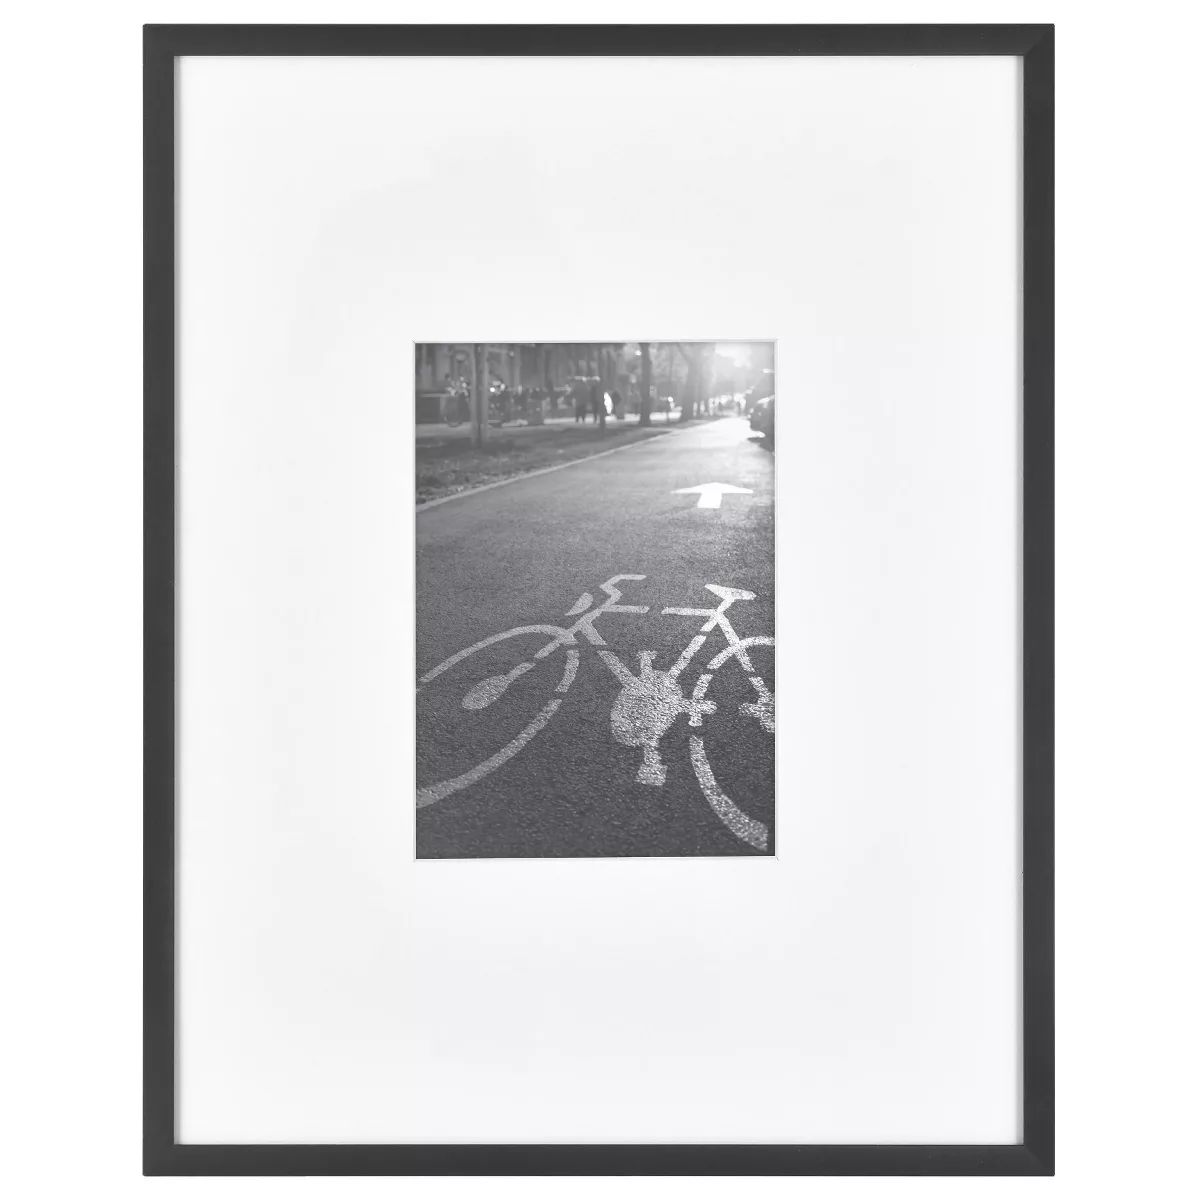 11.3" x 14.4" Matted For 5" x 7" Thin Metal Gallery Frame Black - Threshold™ | Target